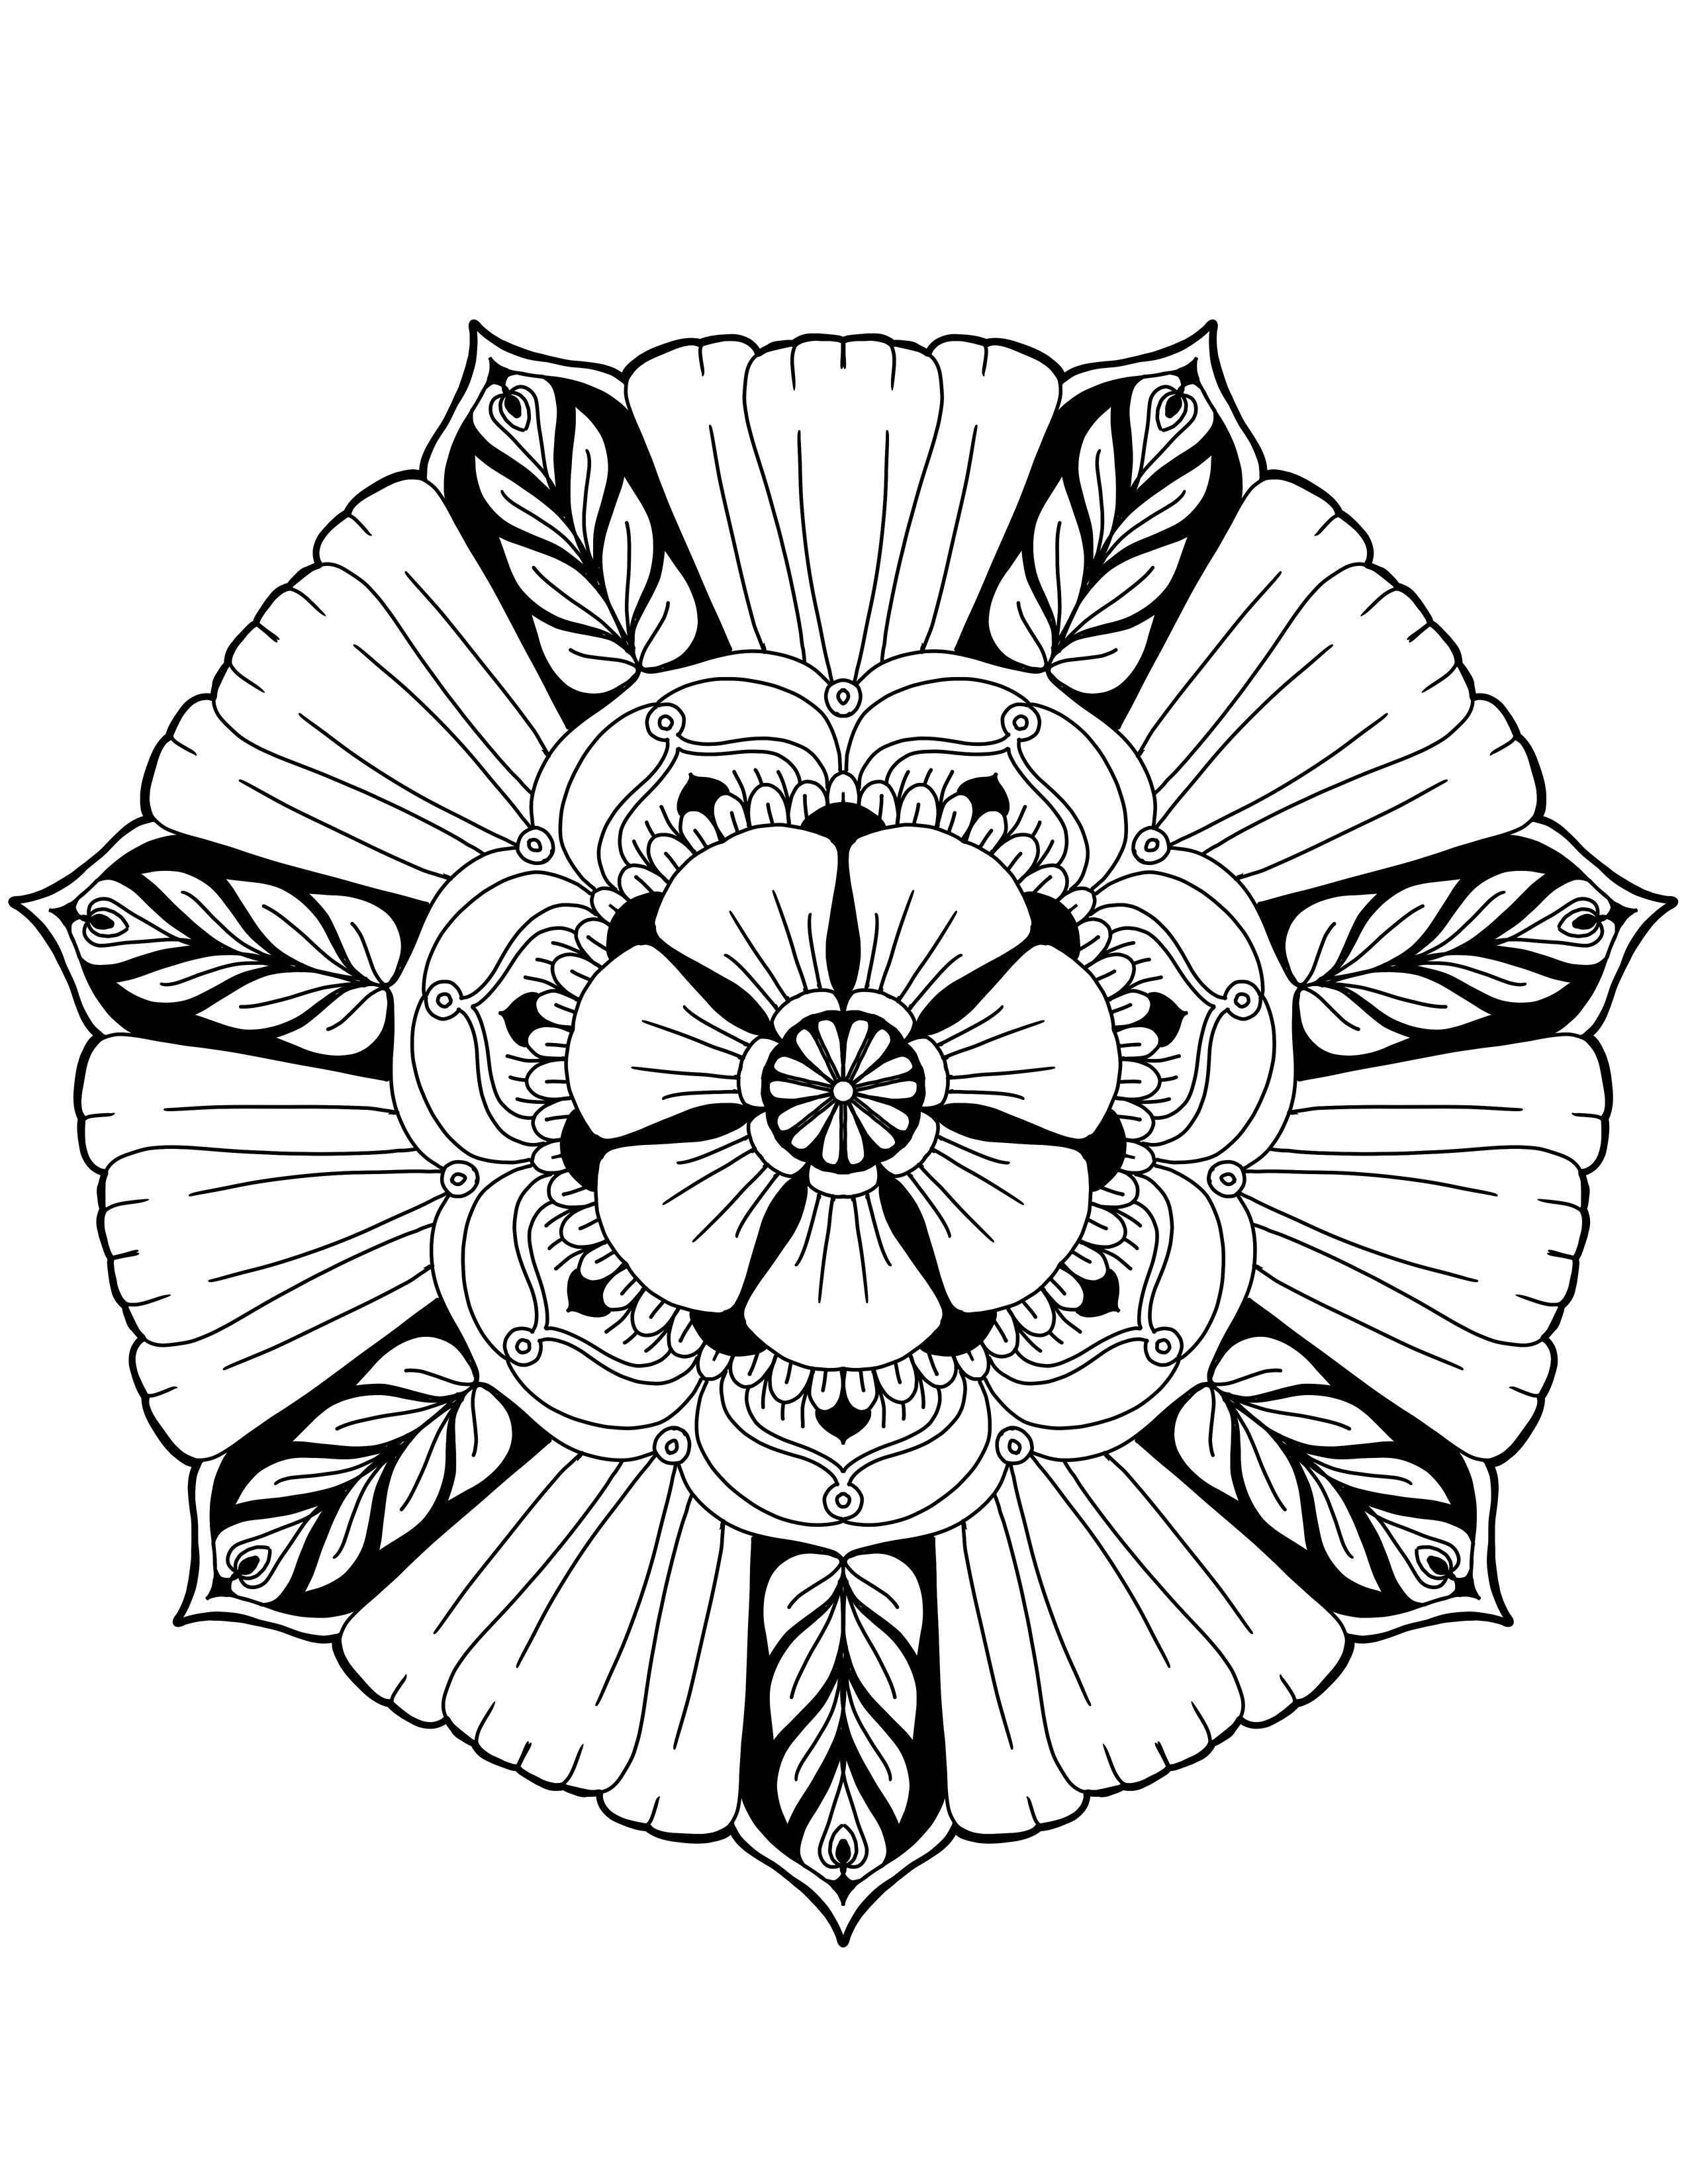 414 Unicorn Cool Mandala Coloring Pages with Printable